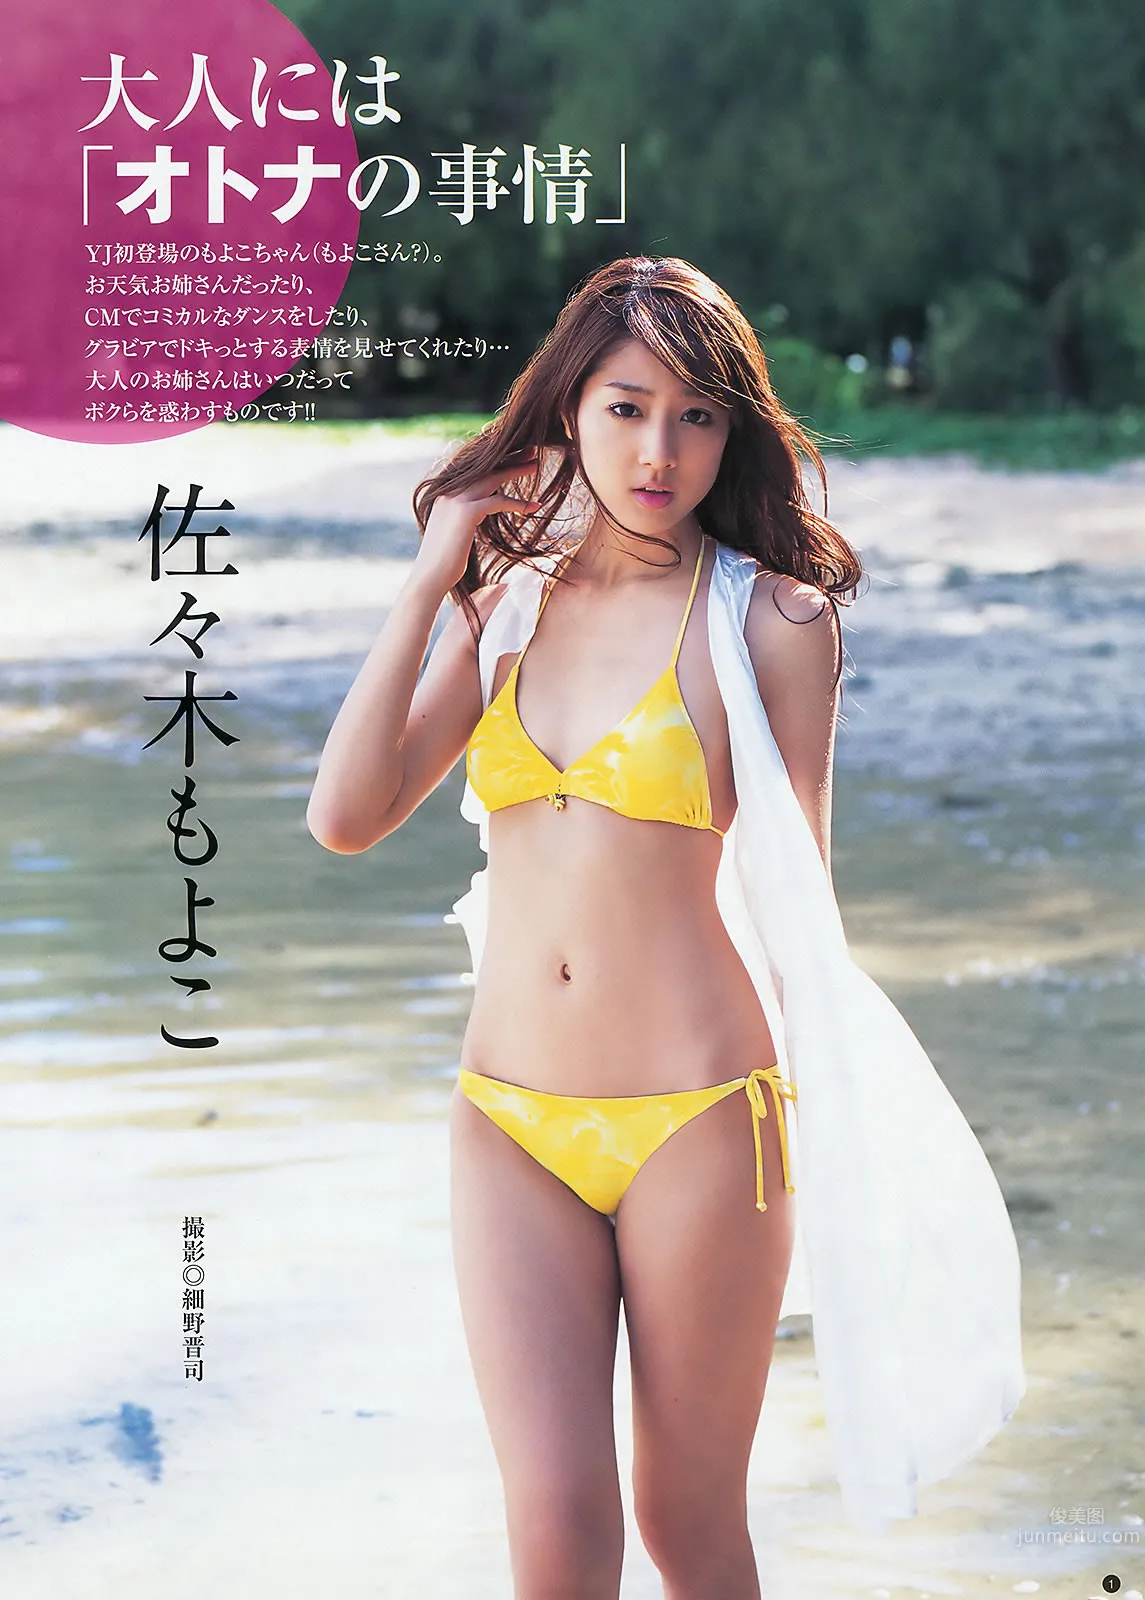 [Weekly Young Jump] 2012 No.45 46 SUPER☆GiRLS 佐々木もよこ 山本彩 松井咲子_19